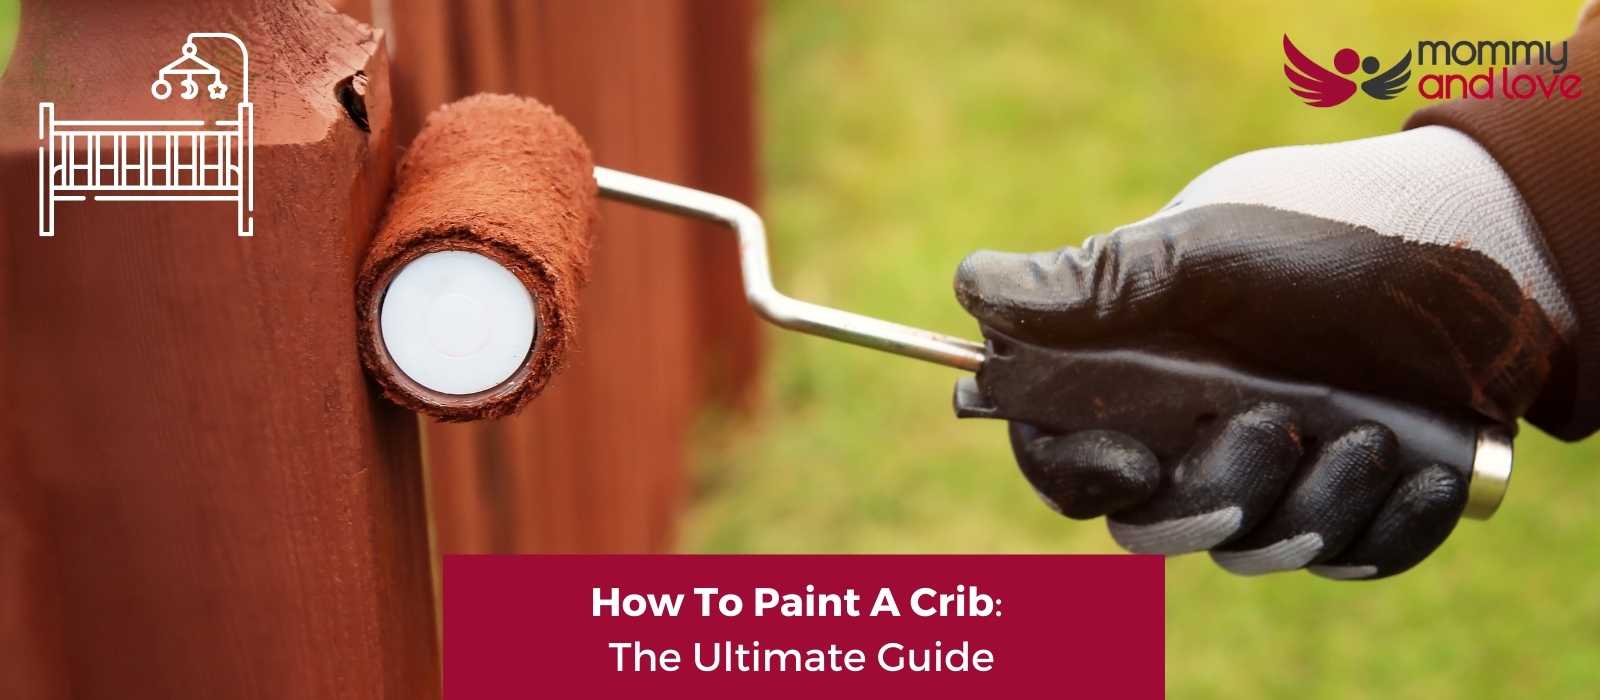 How To Paint A Crib The Ultimate Guide